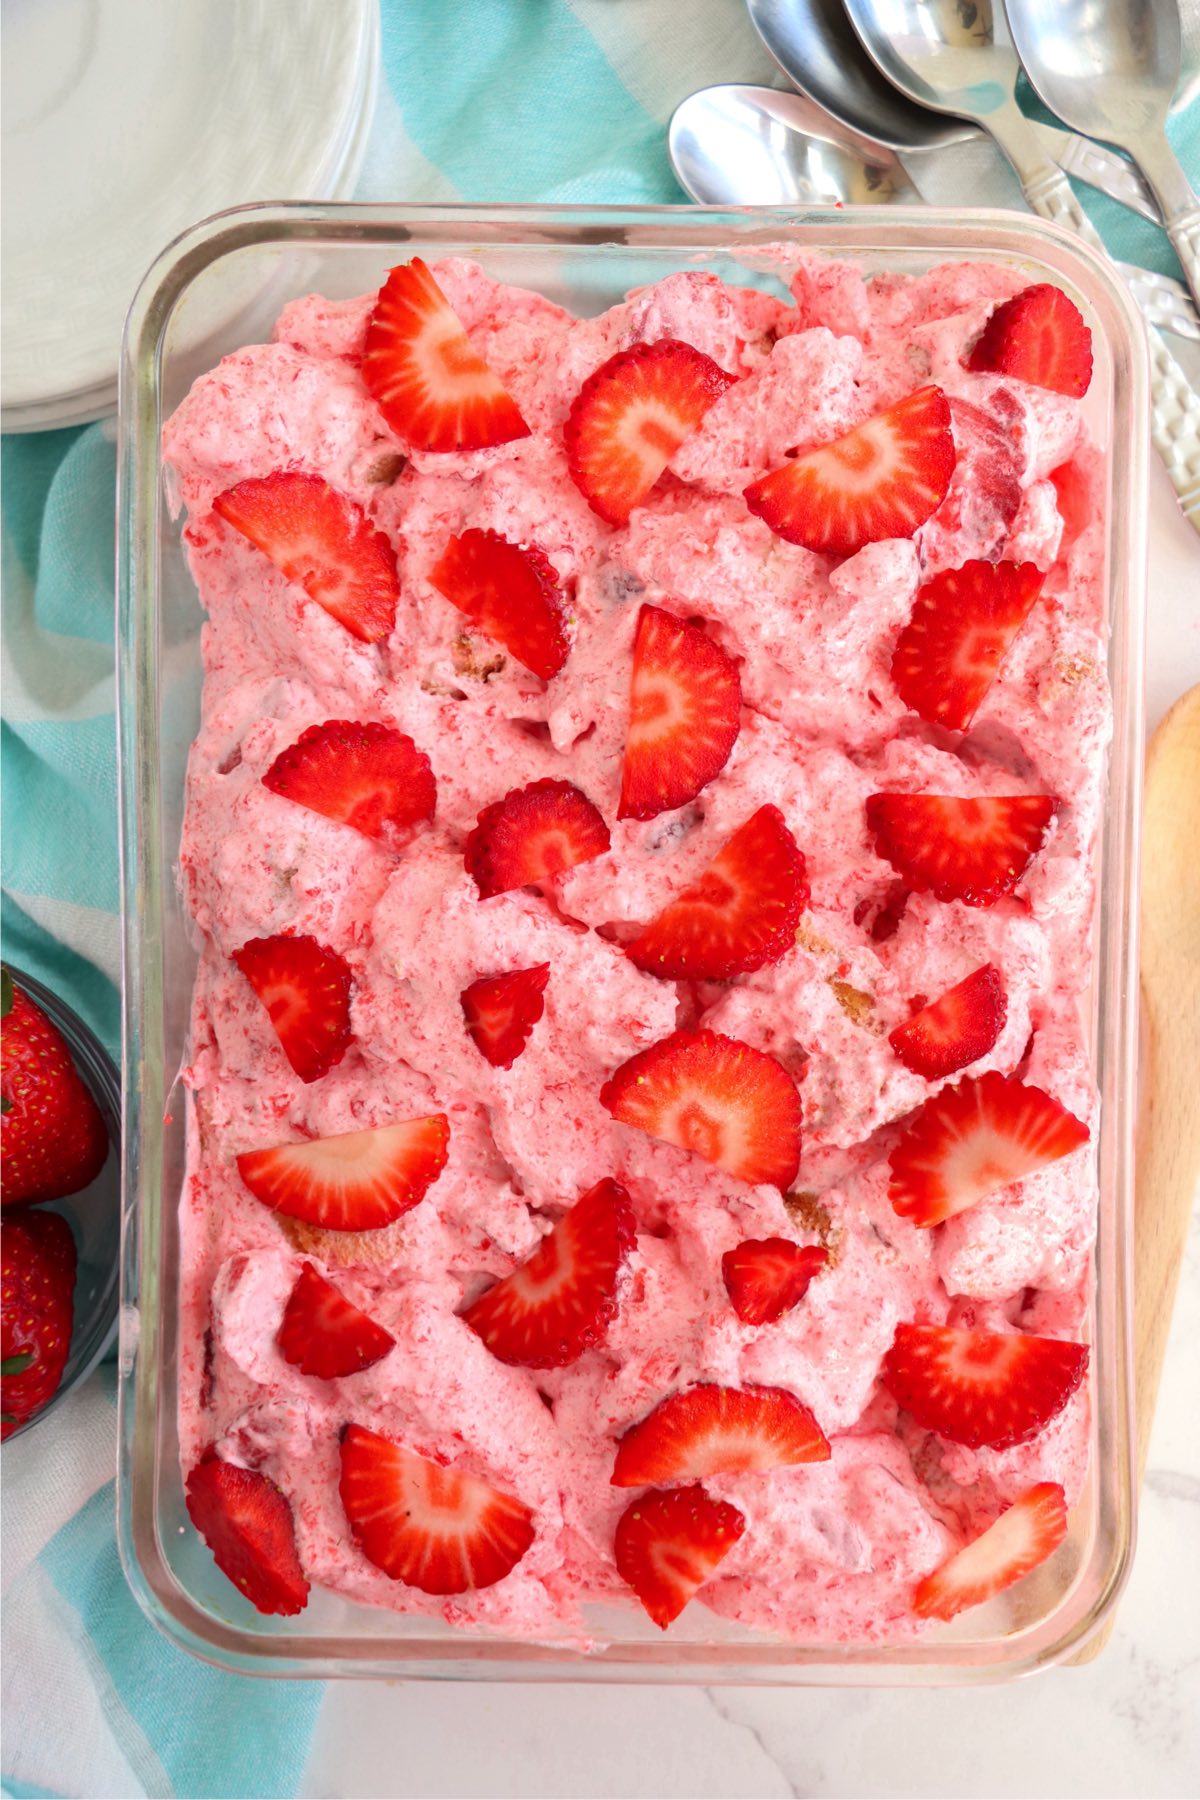 Strawberry jello and angel food cake dessert in a glass cake pan